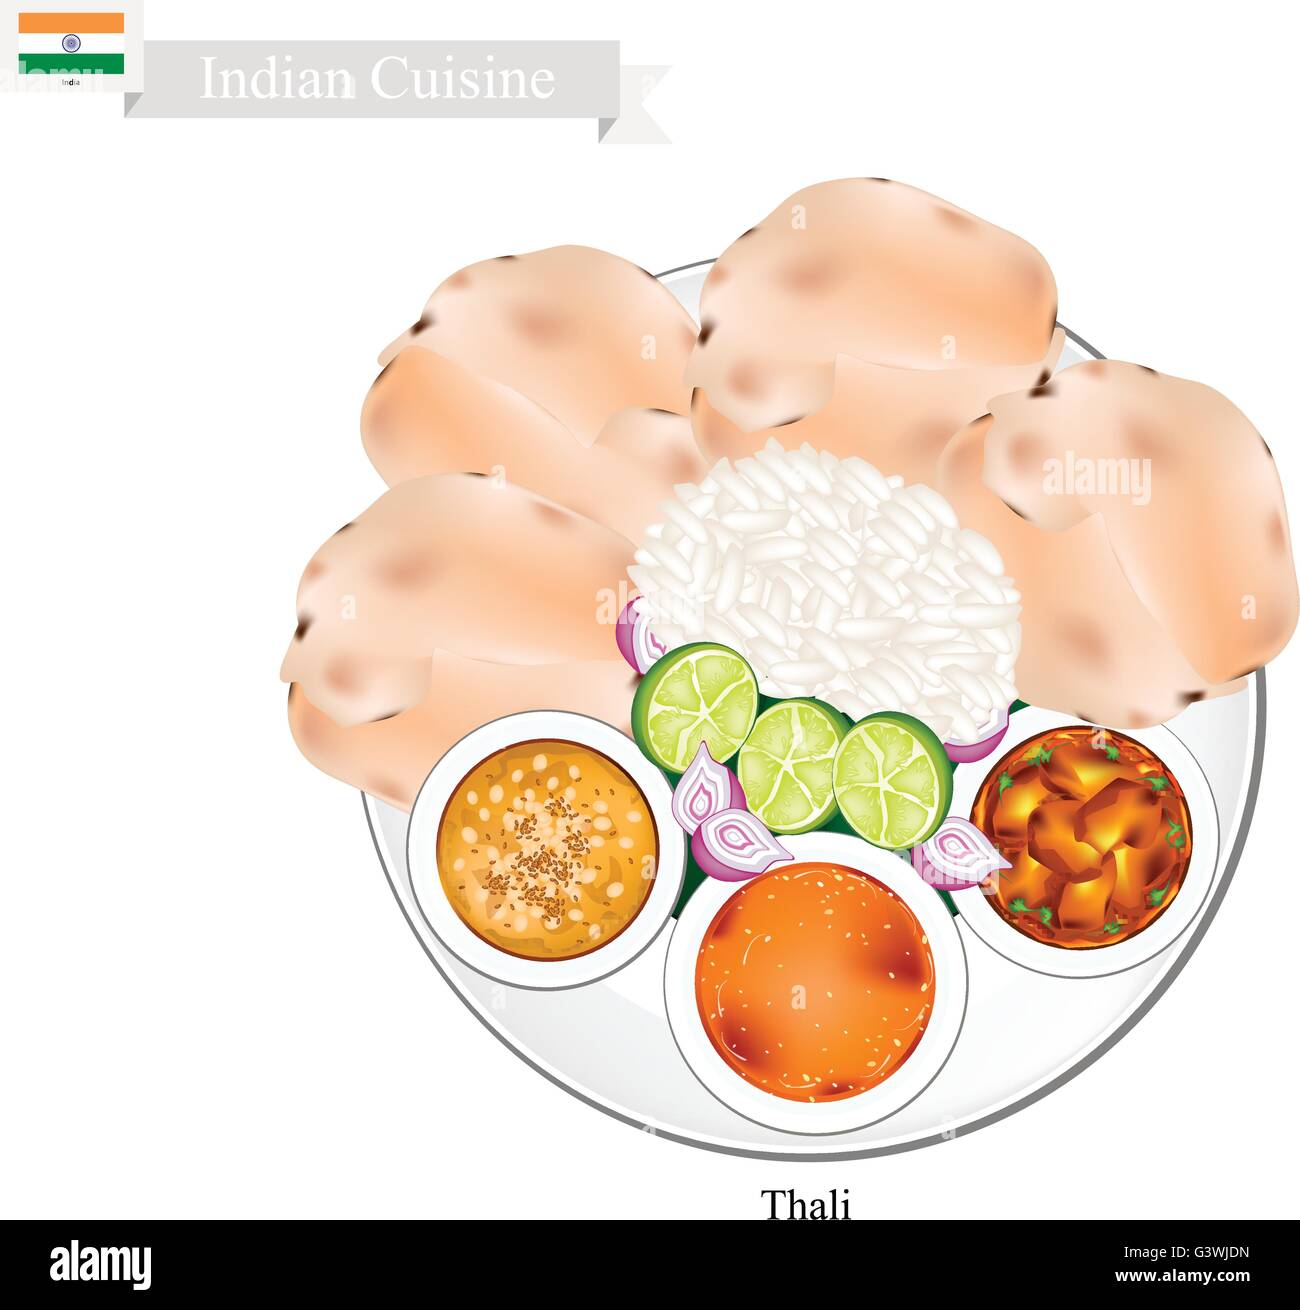 Indian Cuisine, Thali or Traditional Steamed Rice and Flatbread Served with Indian Bean Soup, Sambar and Curry Stew. One of The Stock Vector